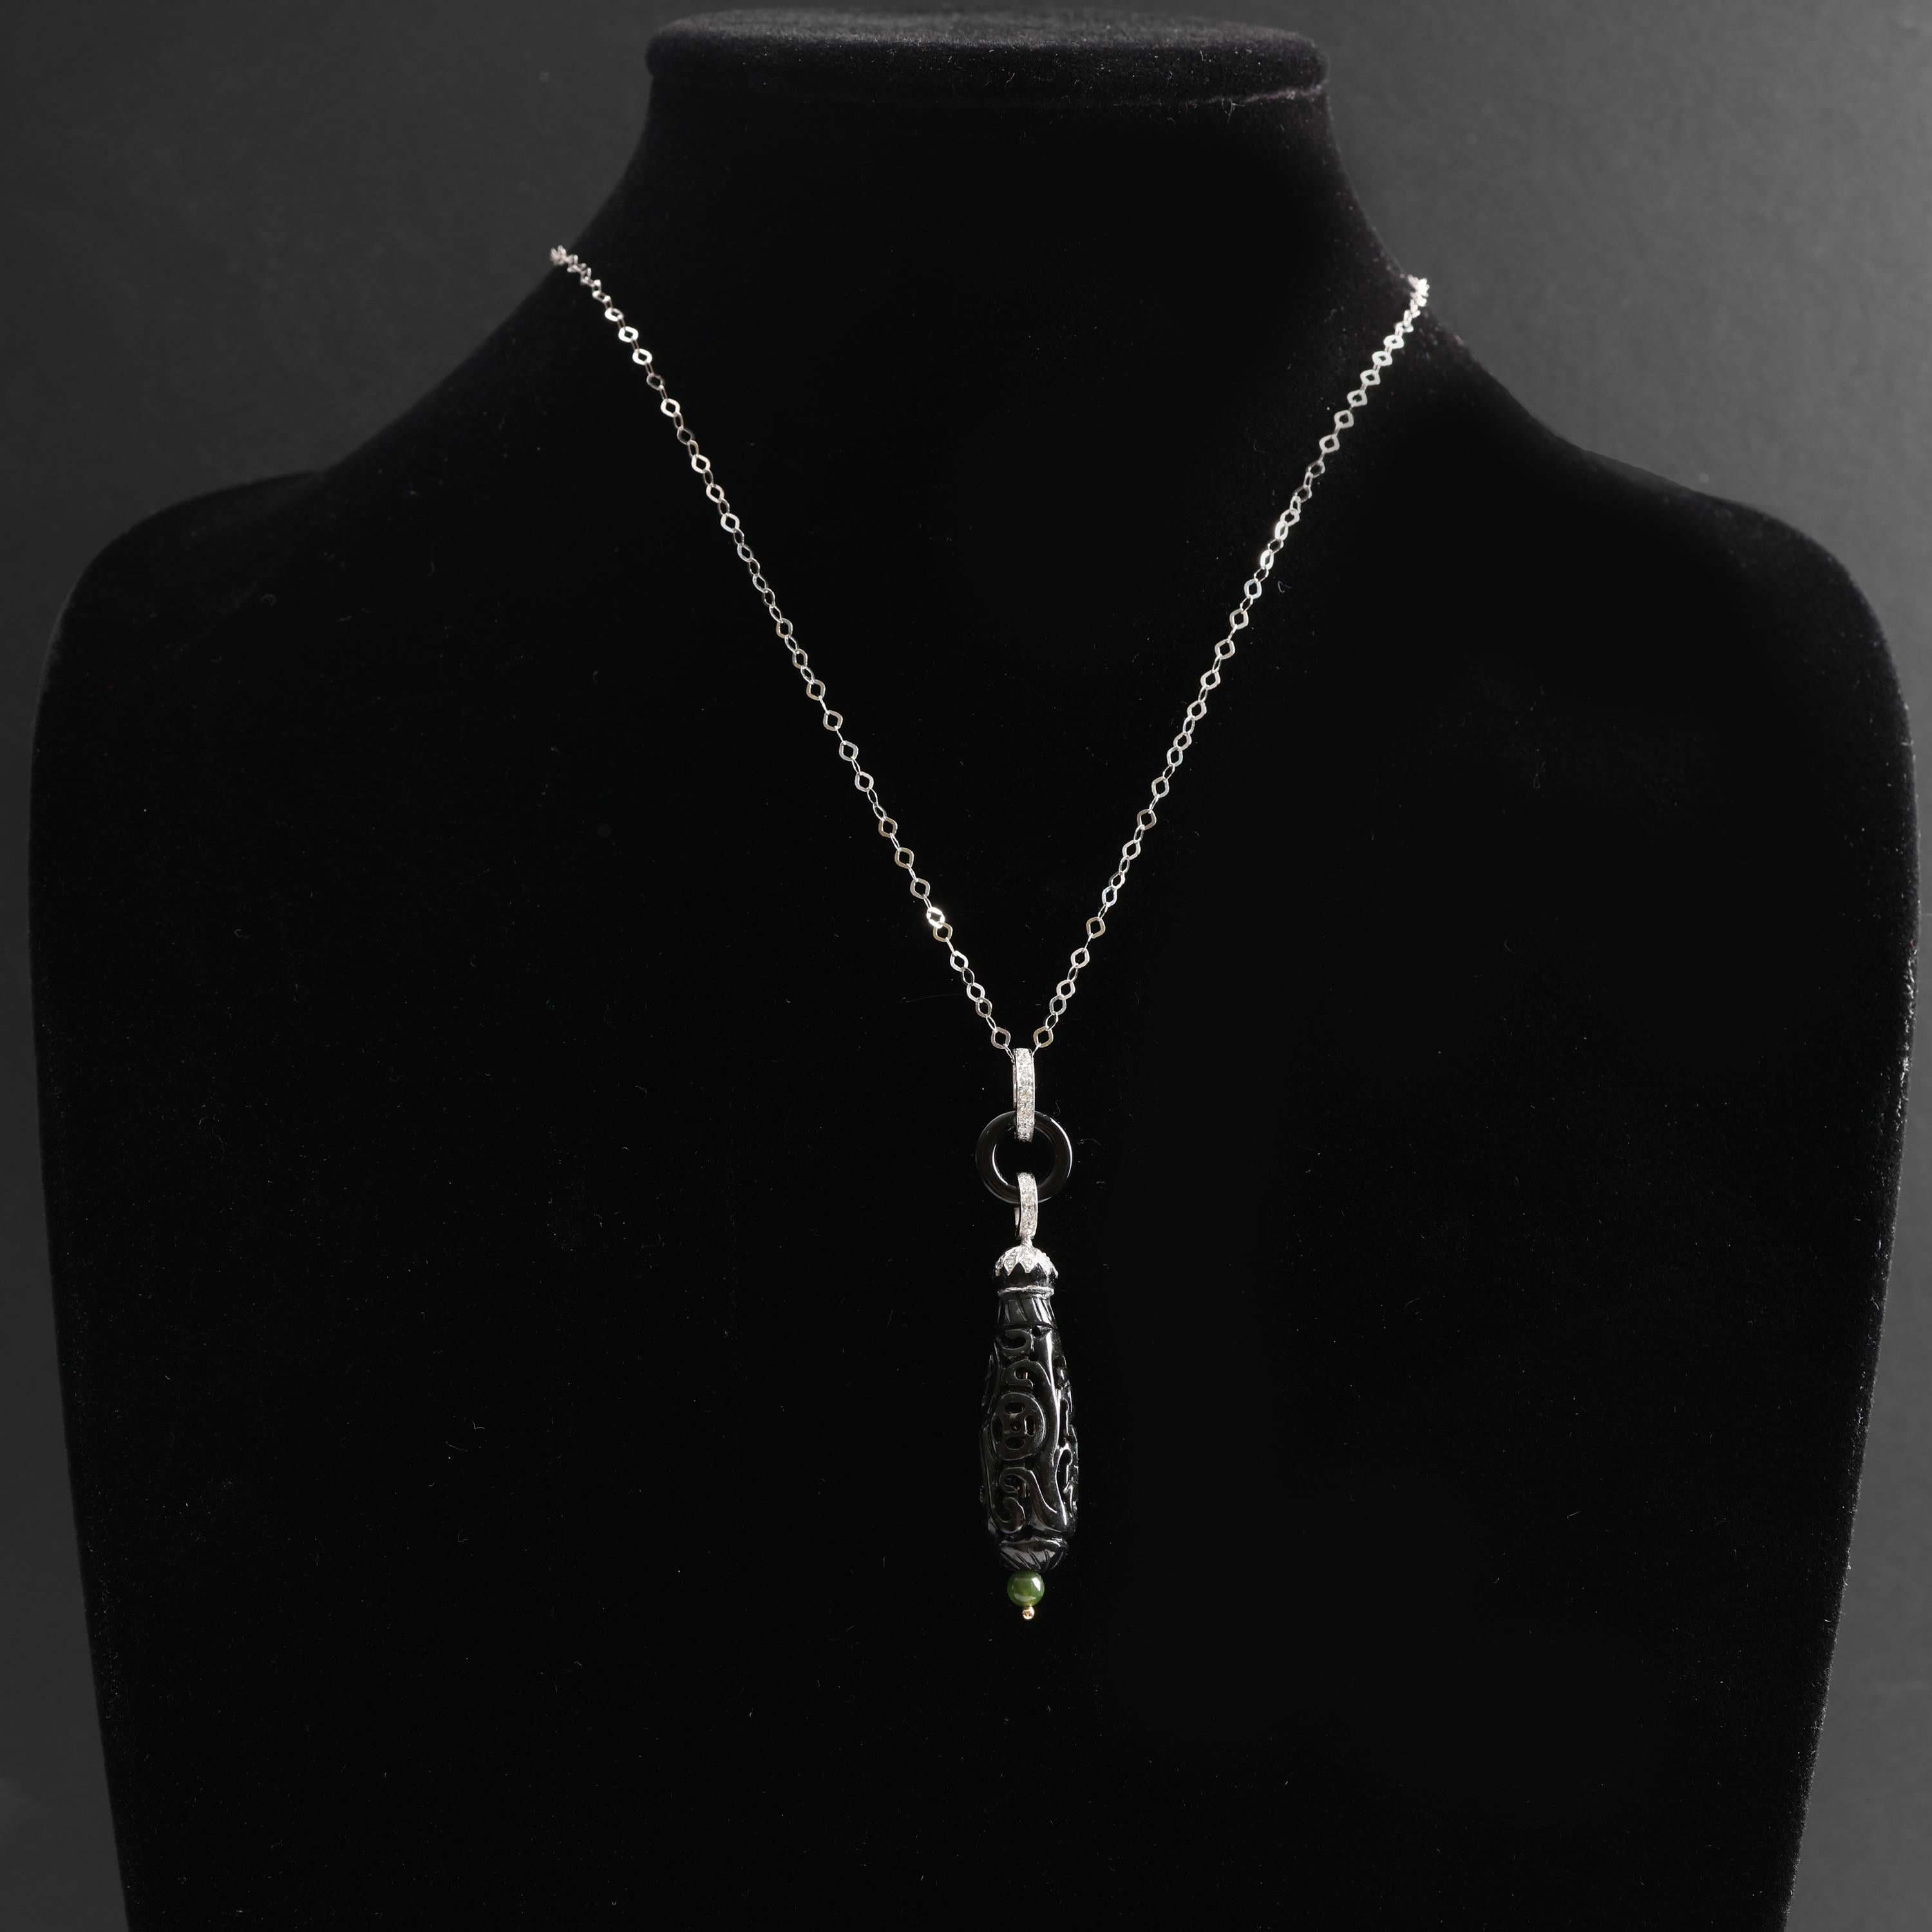 A dramatic hand-carved and highly detailed black nephrite jade drop that measures approximately 35mm x 11mm is suspended from an Art Deco style bail in 14K white gold. The bail features numerous tiny white diamonds, a 12mm ring of glossy black onyx,